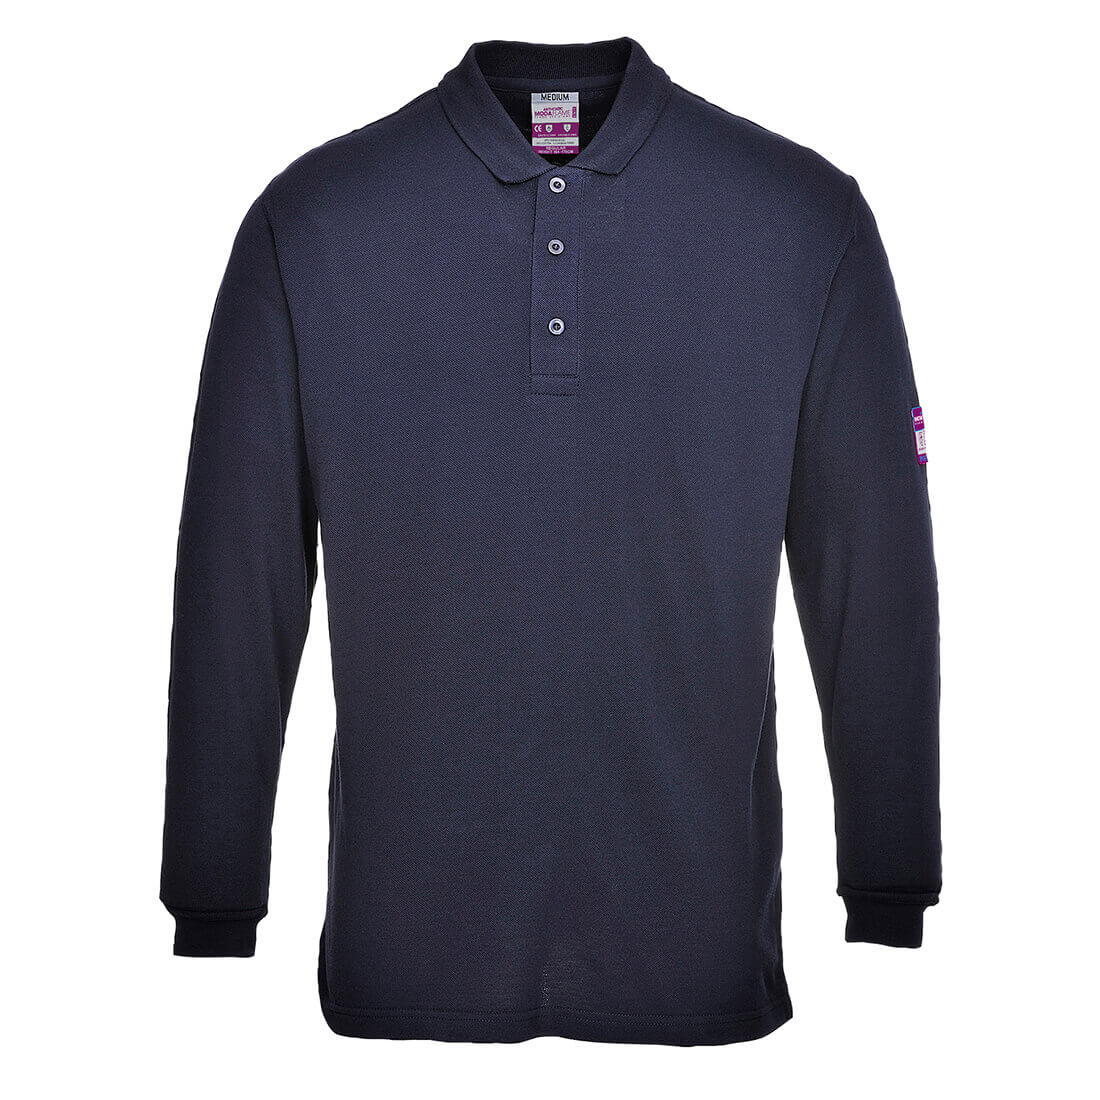 Image of Modaflame Mens Flame Resistant Antistatic Long Sleeve Polo Shirt Navy L